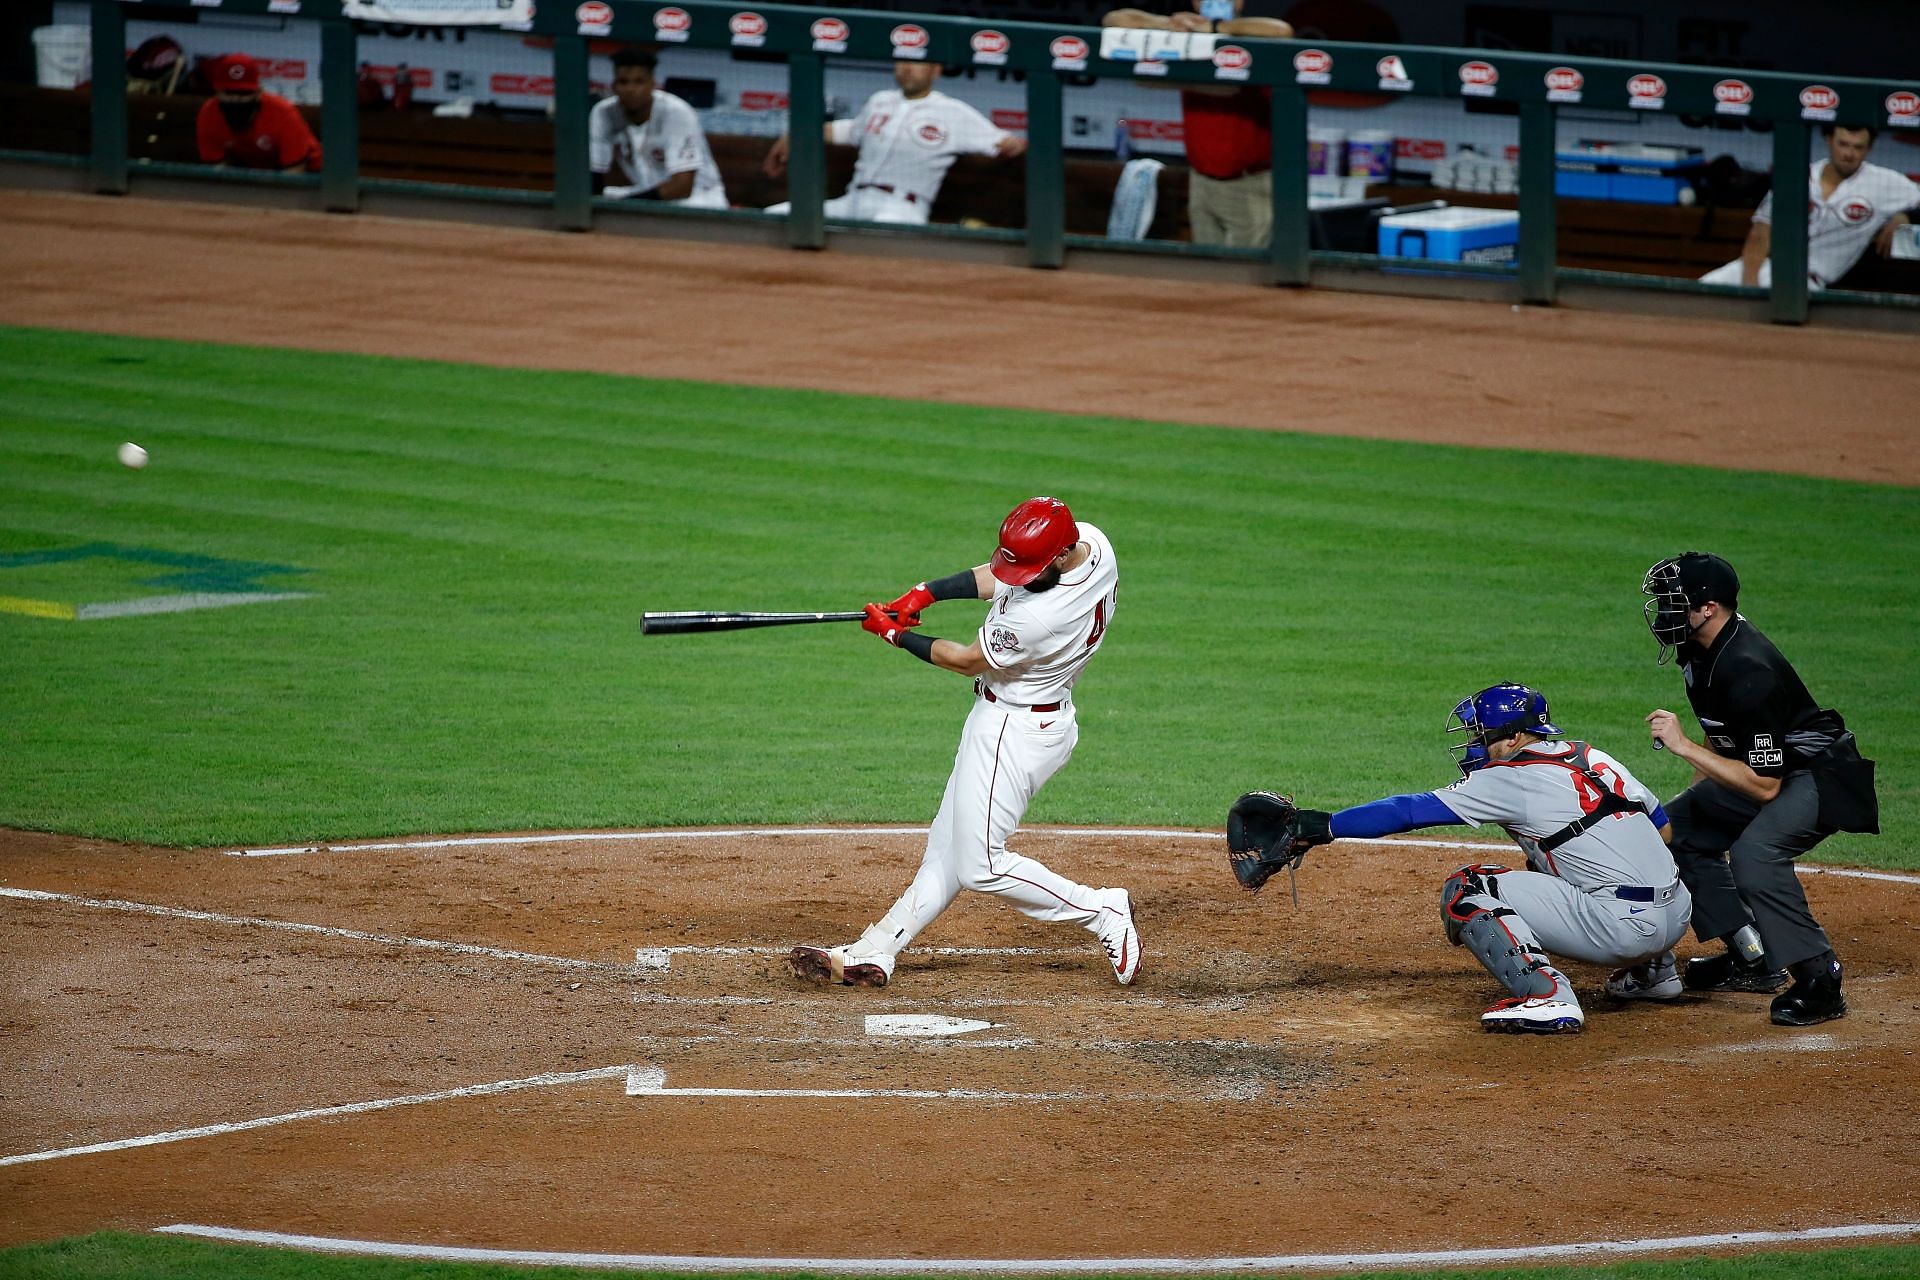 Jesse Winker crushing a ball in the playoffs